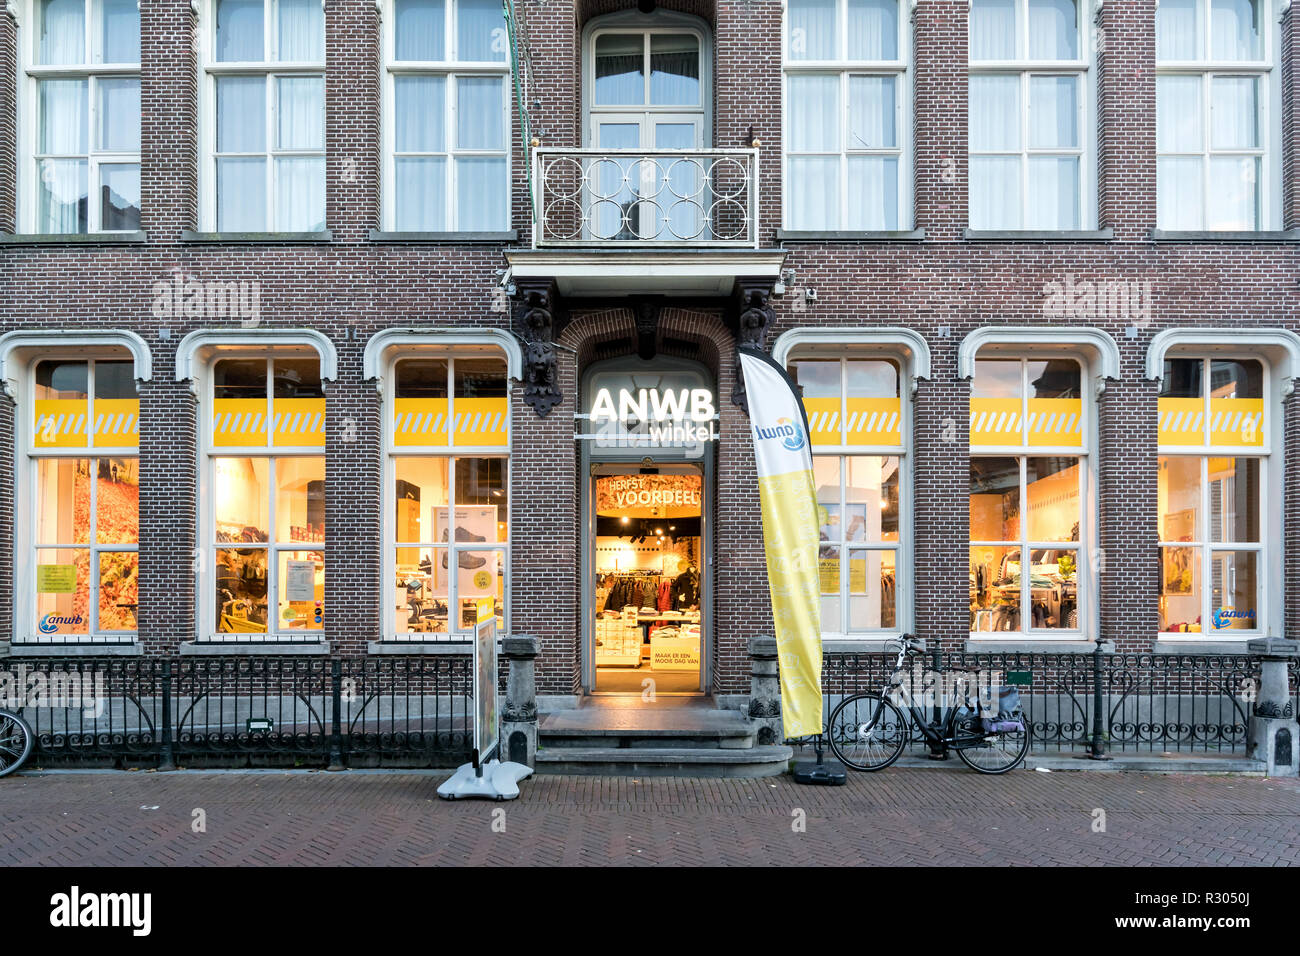 ANWB winkel in Sneek, the Netherlands. The Royal Dutch Touring Club (ANWB) operates 87 shops selling documents, leisure clothing and travel products Stock Photo -